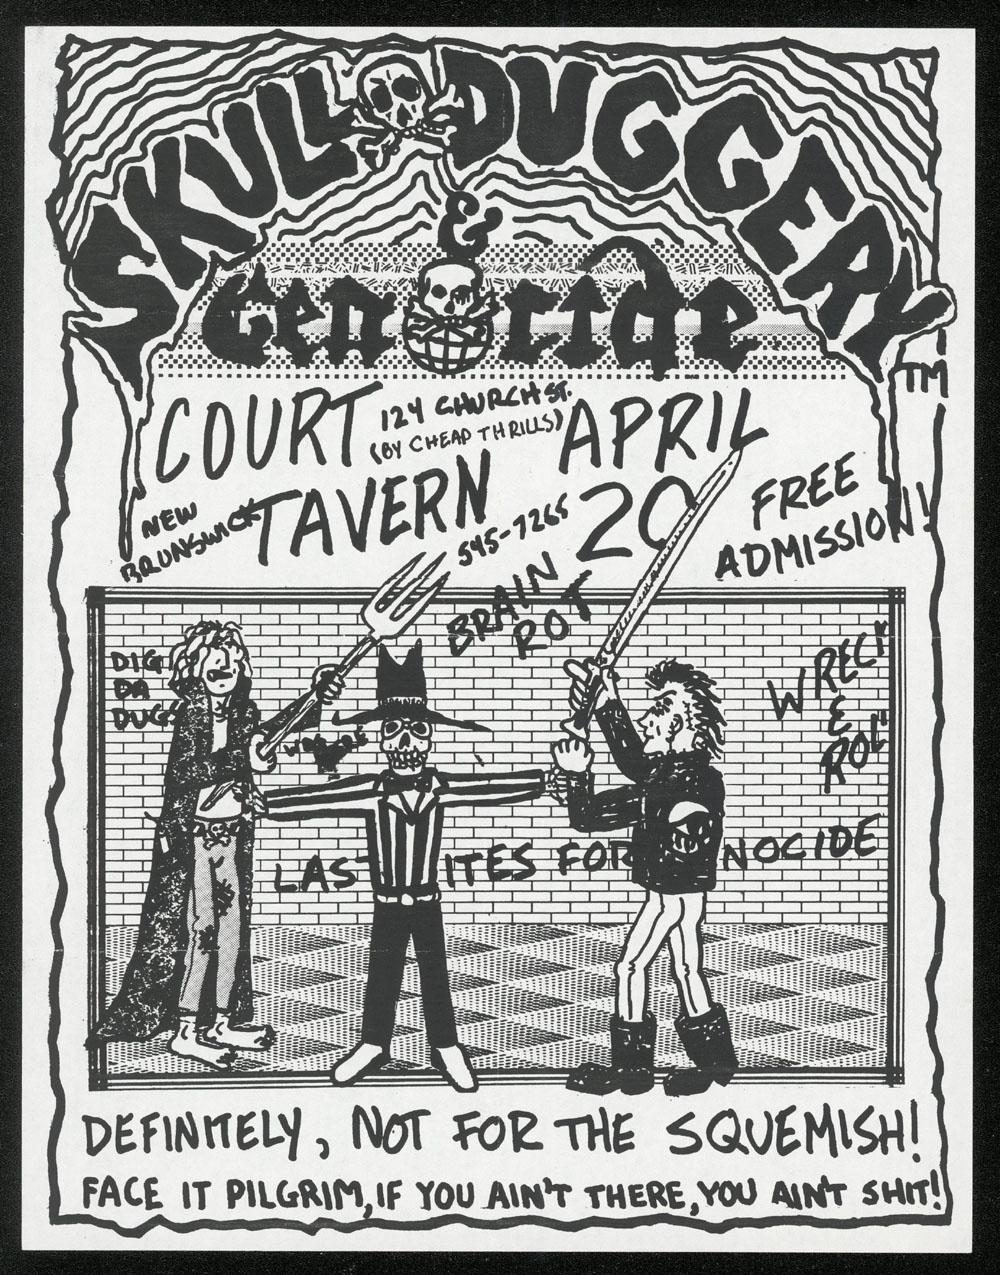 SKULL DUGGERY w/ Genocide at Court Tavern